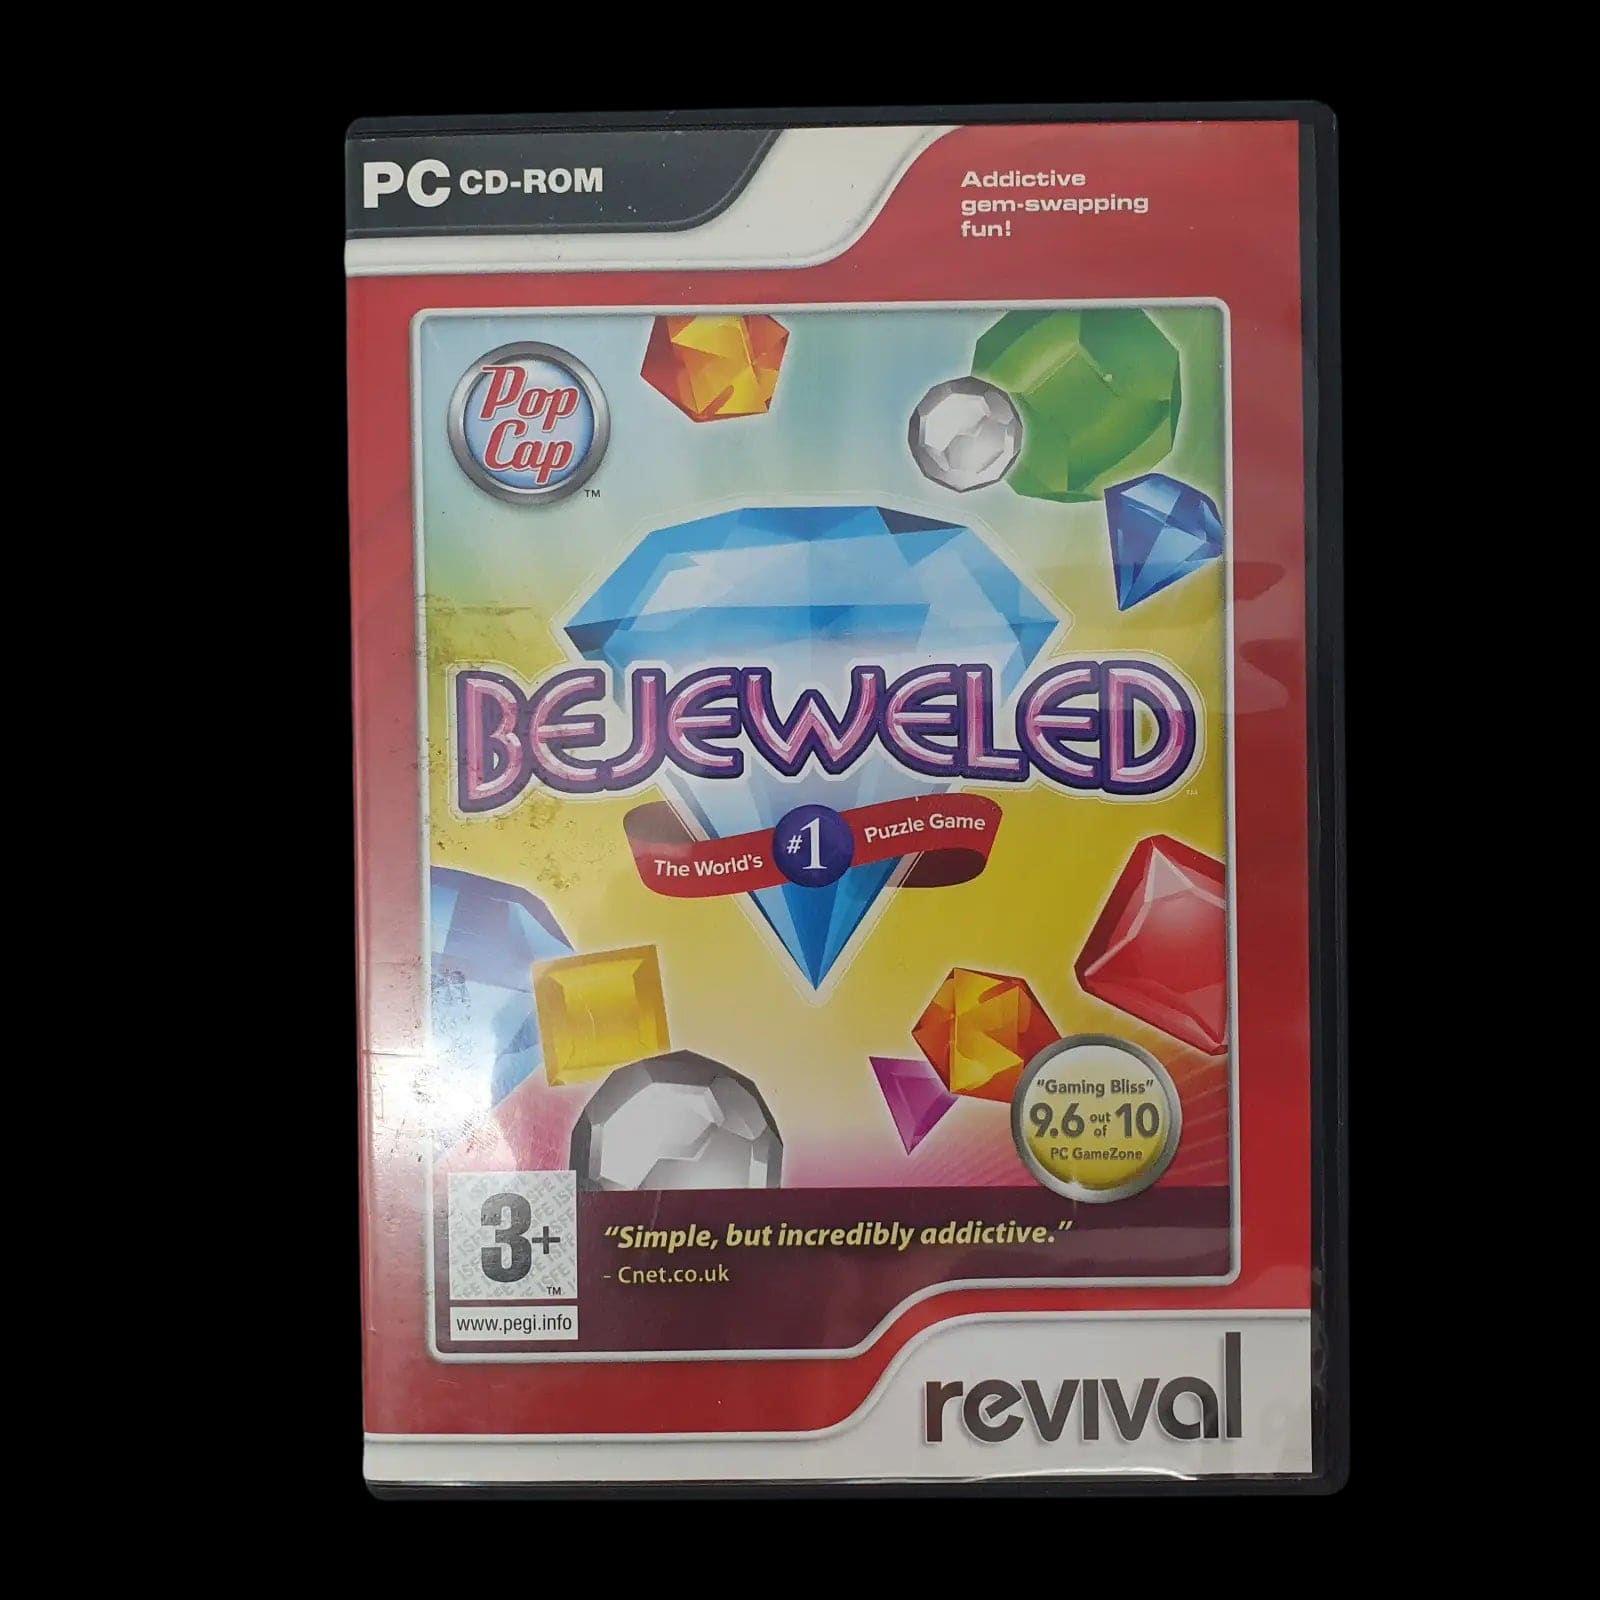 Bejeweled Pc Revival 2000 Video Game - Games - 1 - 2454